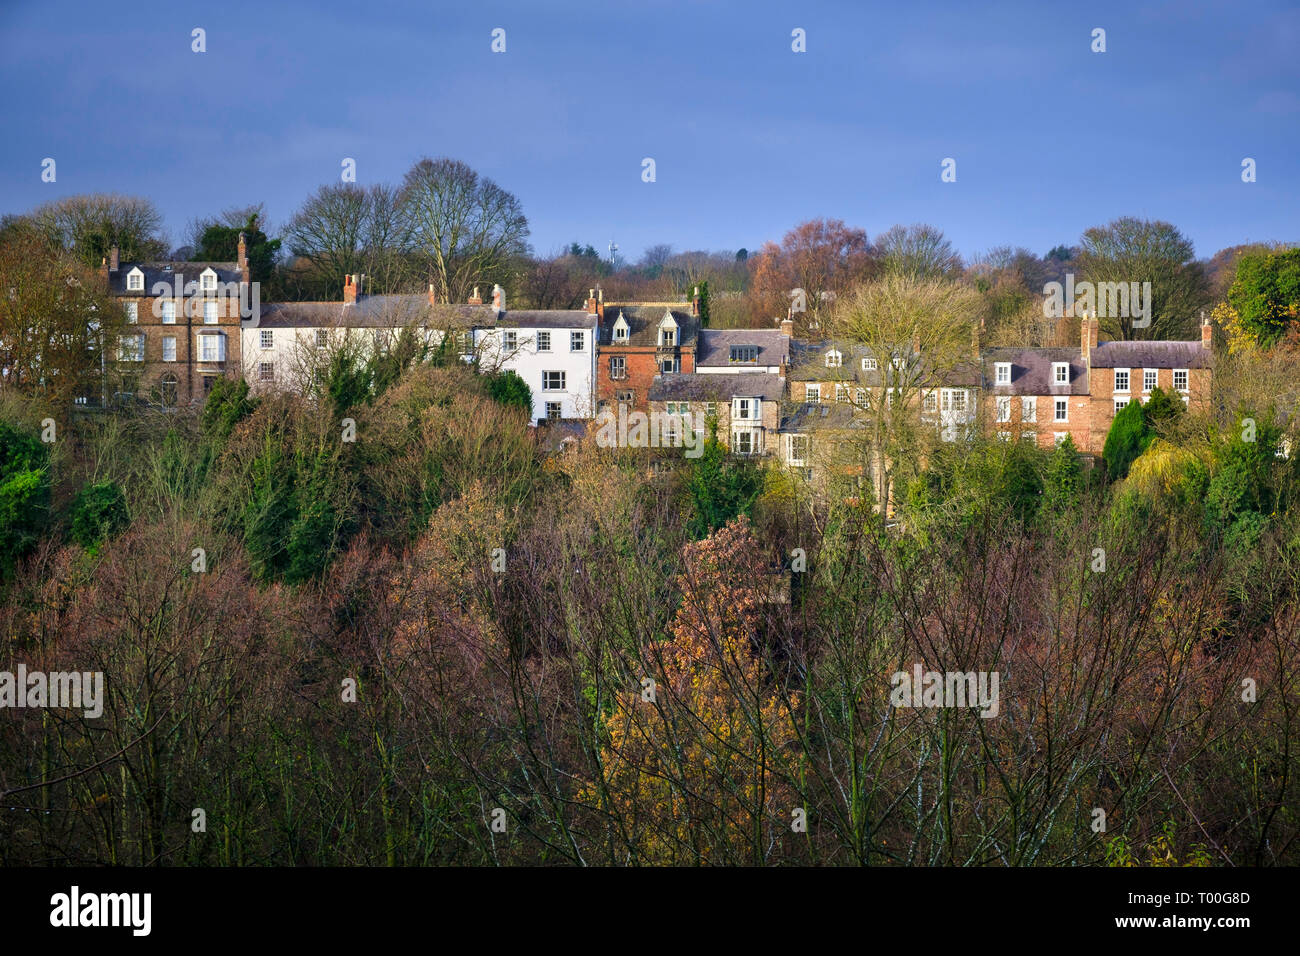 South Street Durham City is an affluent residential area containing a number of Grade II terraced houses with views over the city skyline. Stock Photo